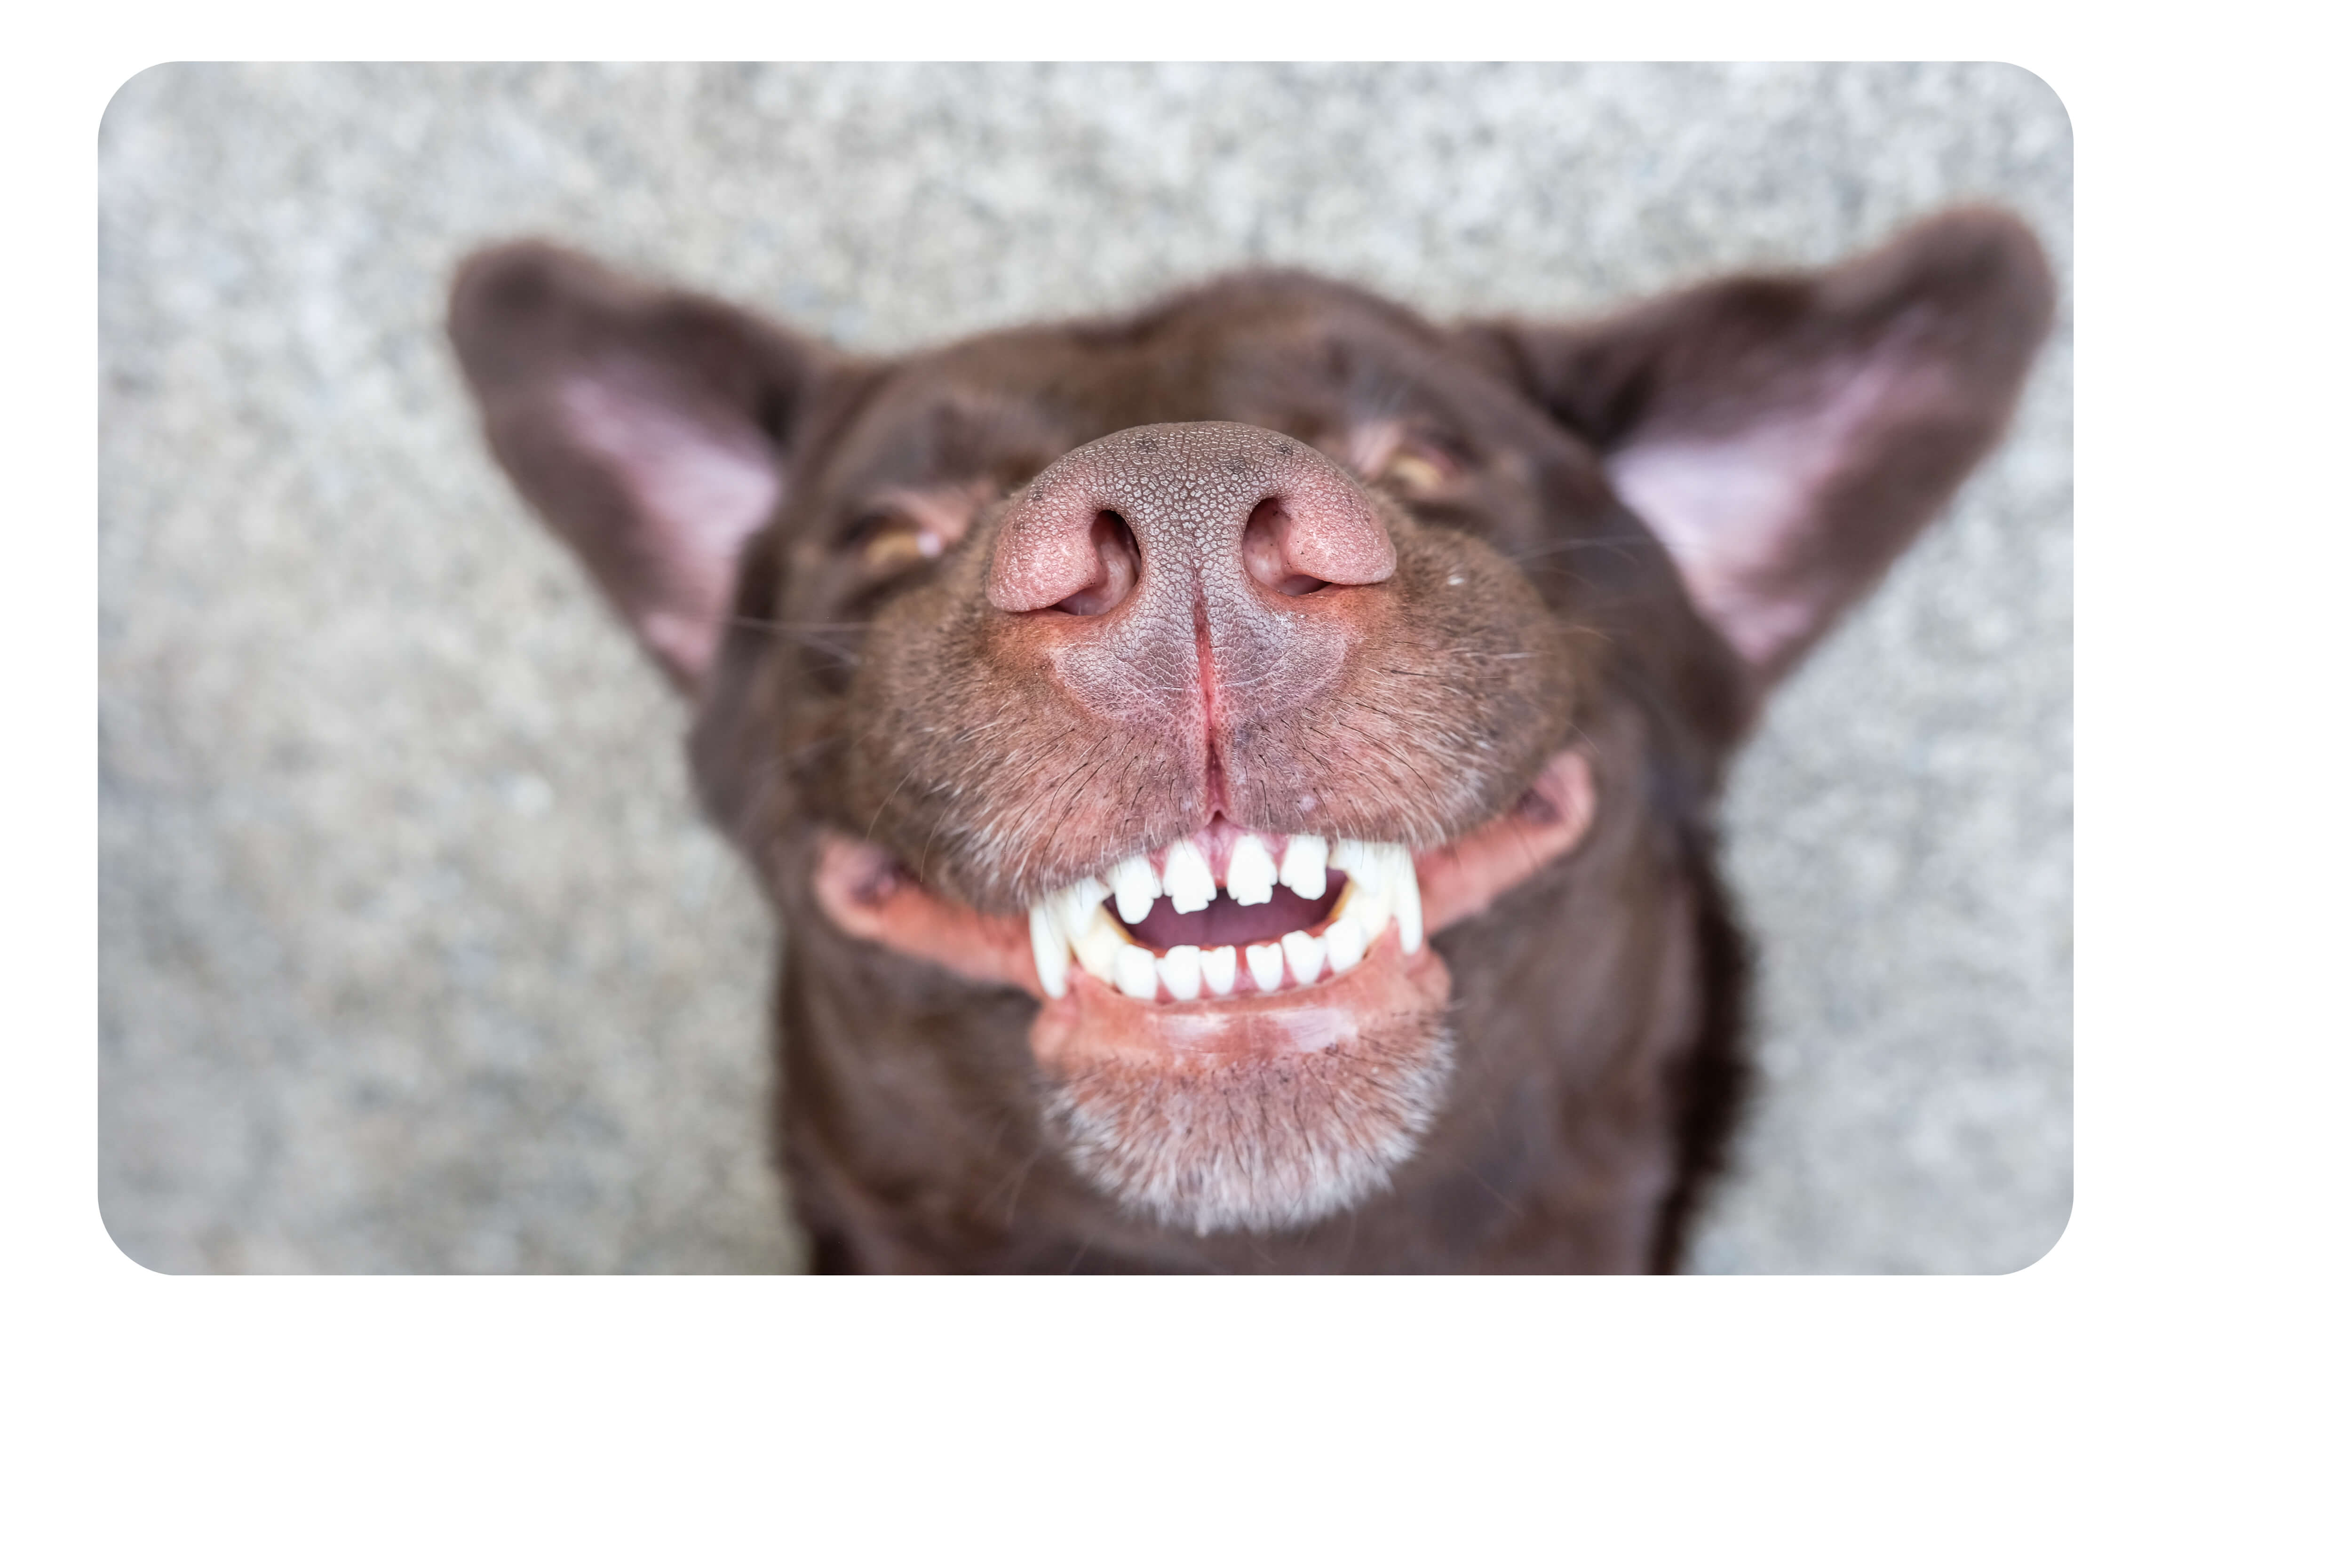 Pet Dental Month: Tips For Caring For Your Dog's Teeth at Home